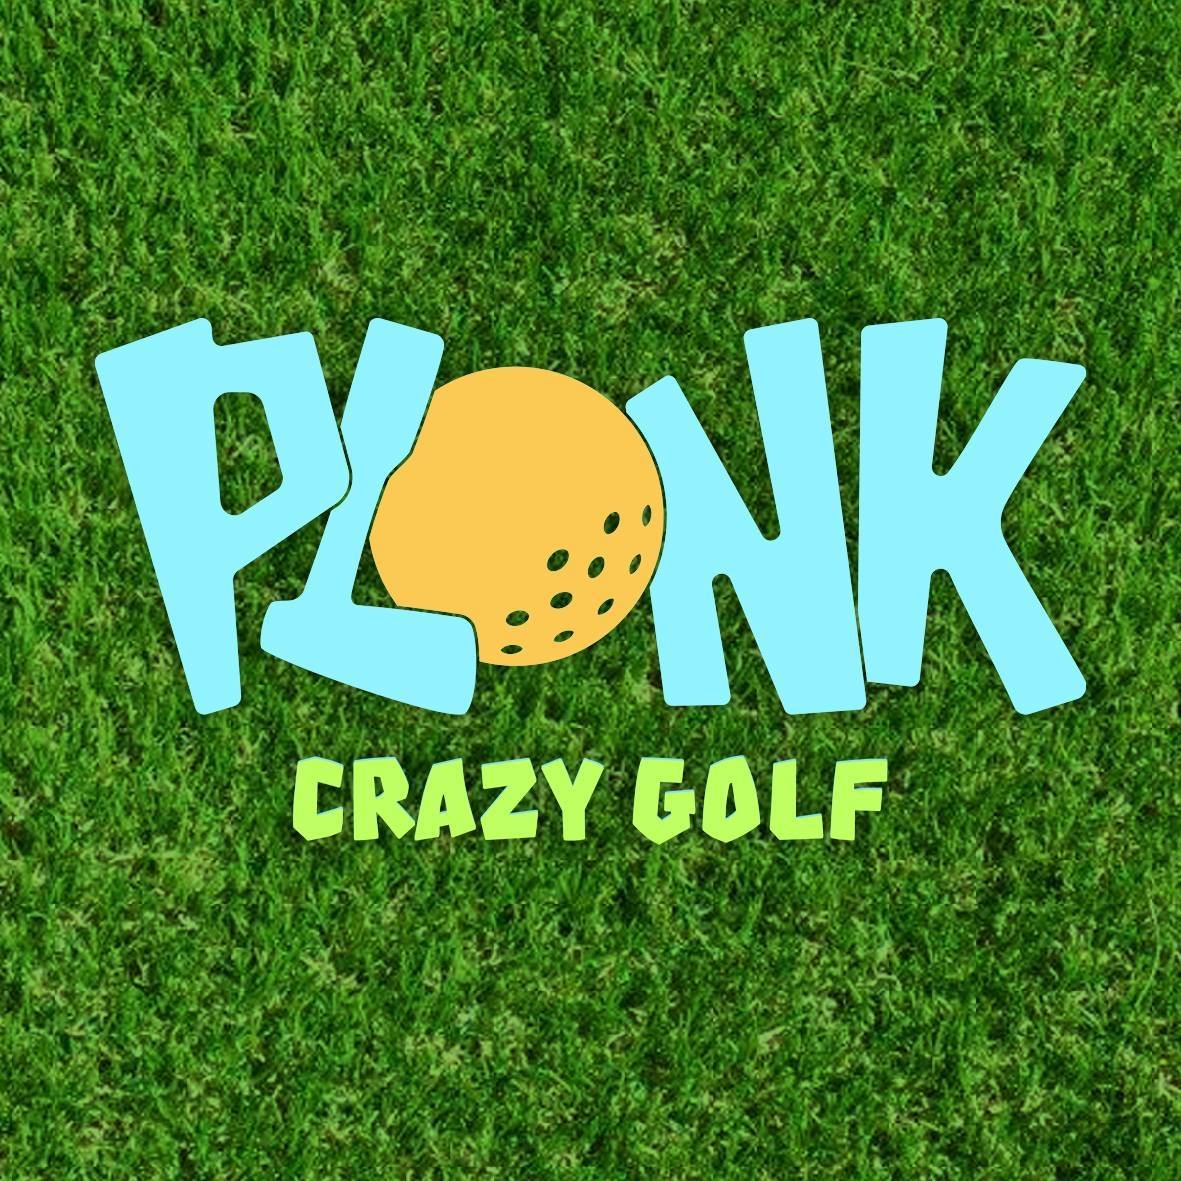 Plonk Golf in Hackney: A Fun-Filled Adventure for All Ages